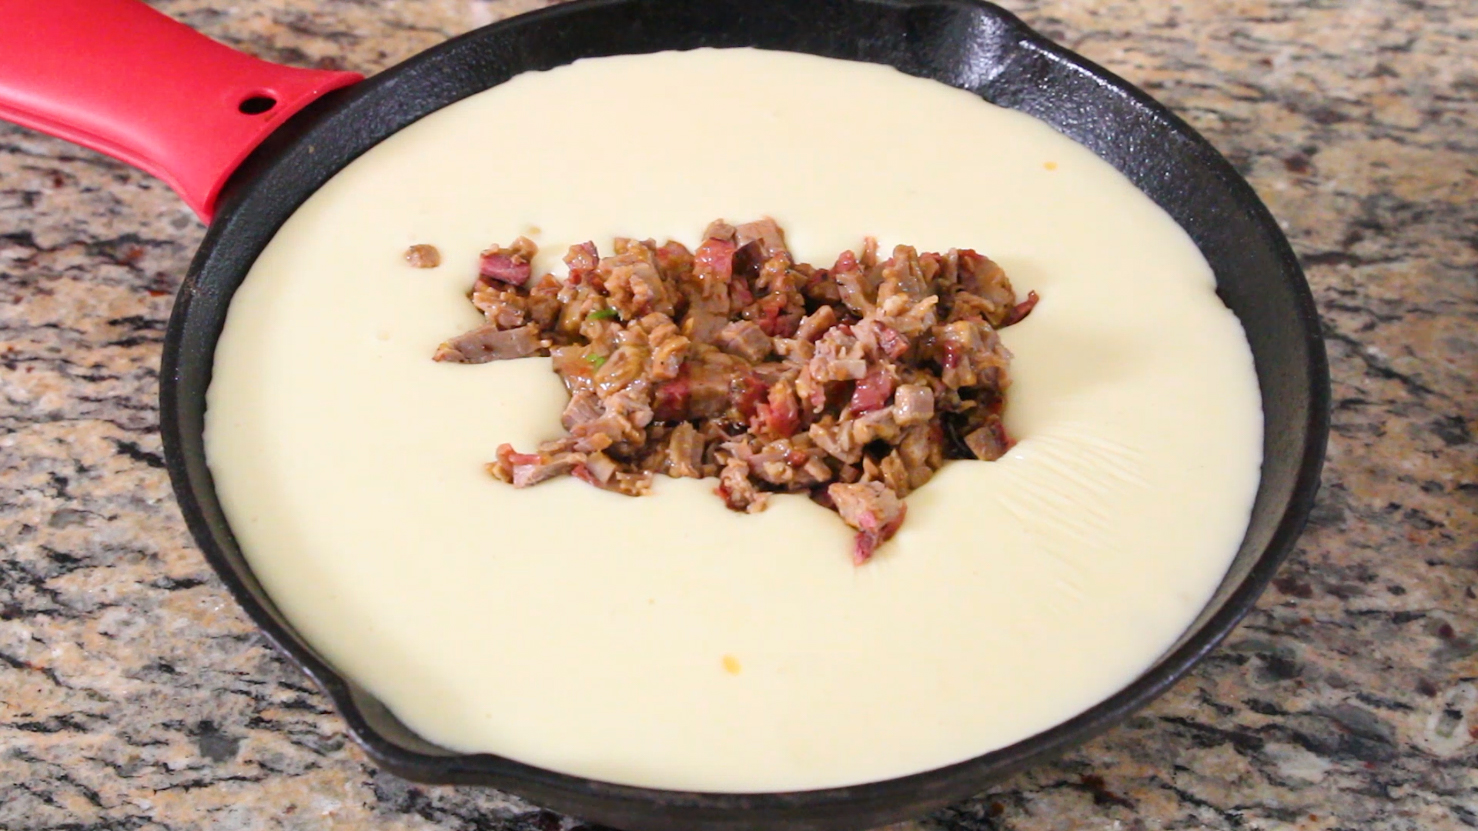 A cast iron skillet filled with queso blanco, being topped with chopped brisket morsels